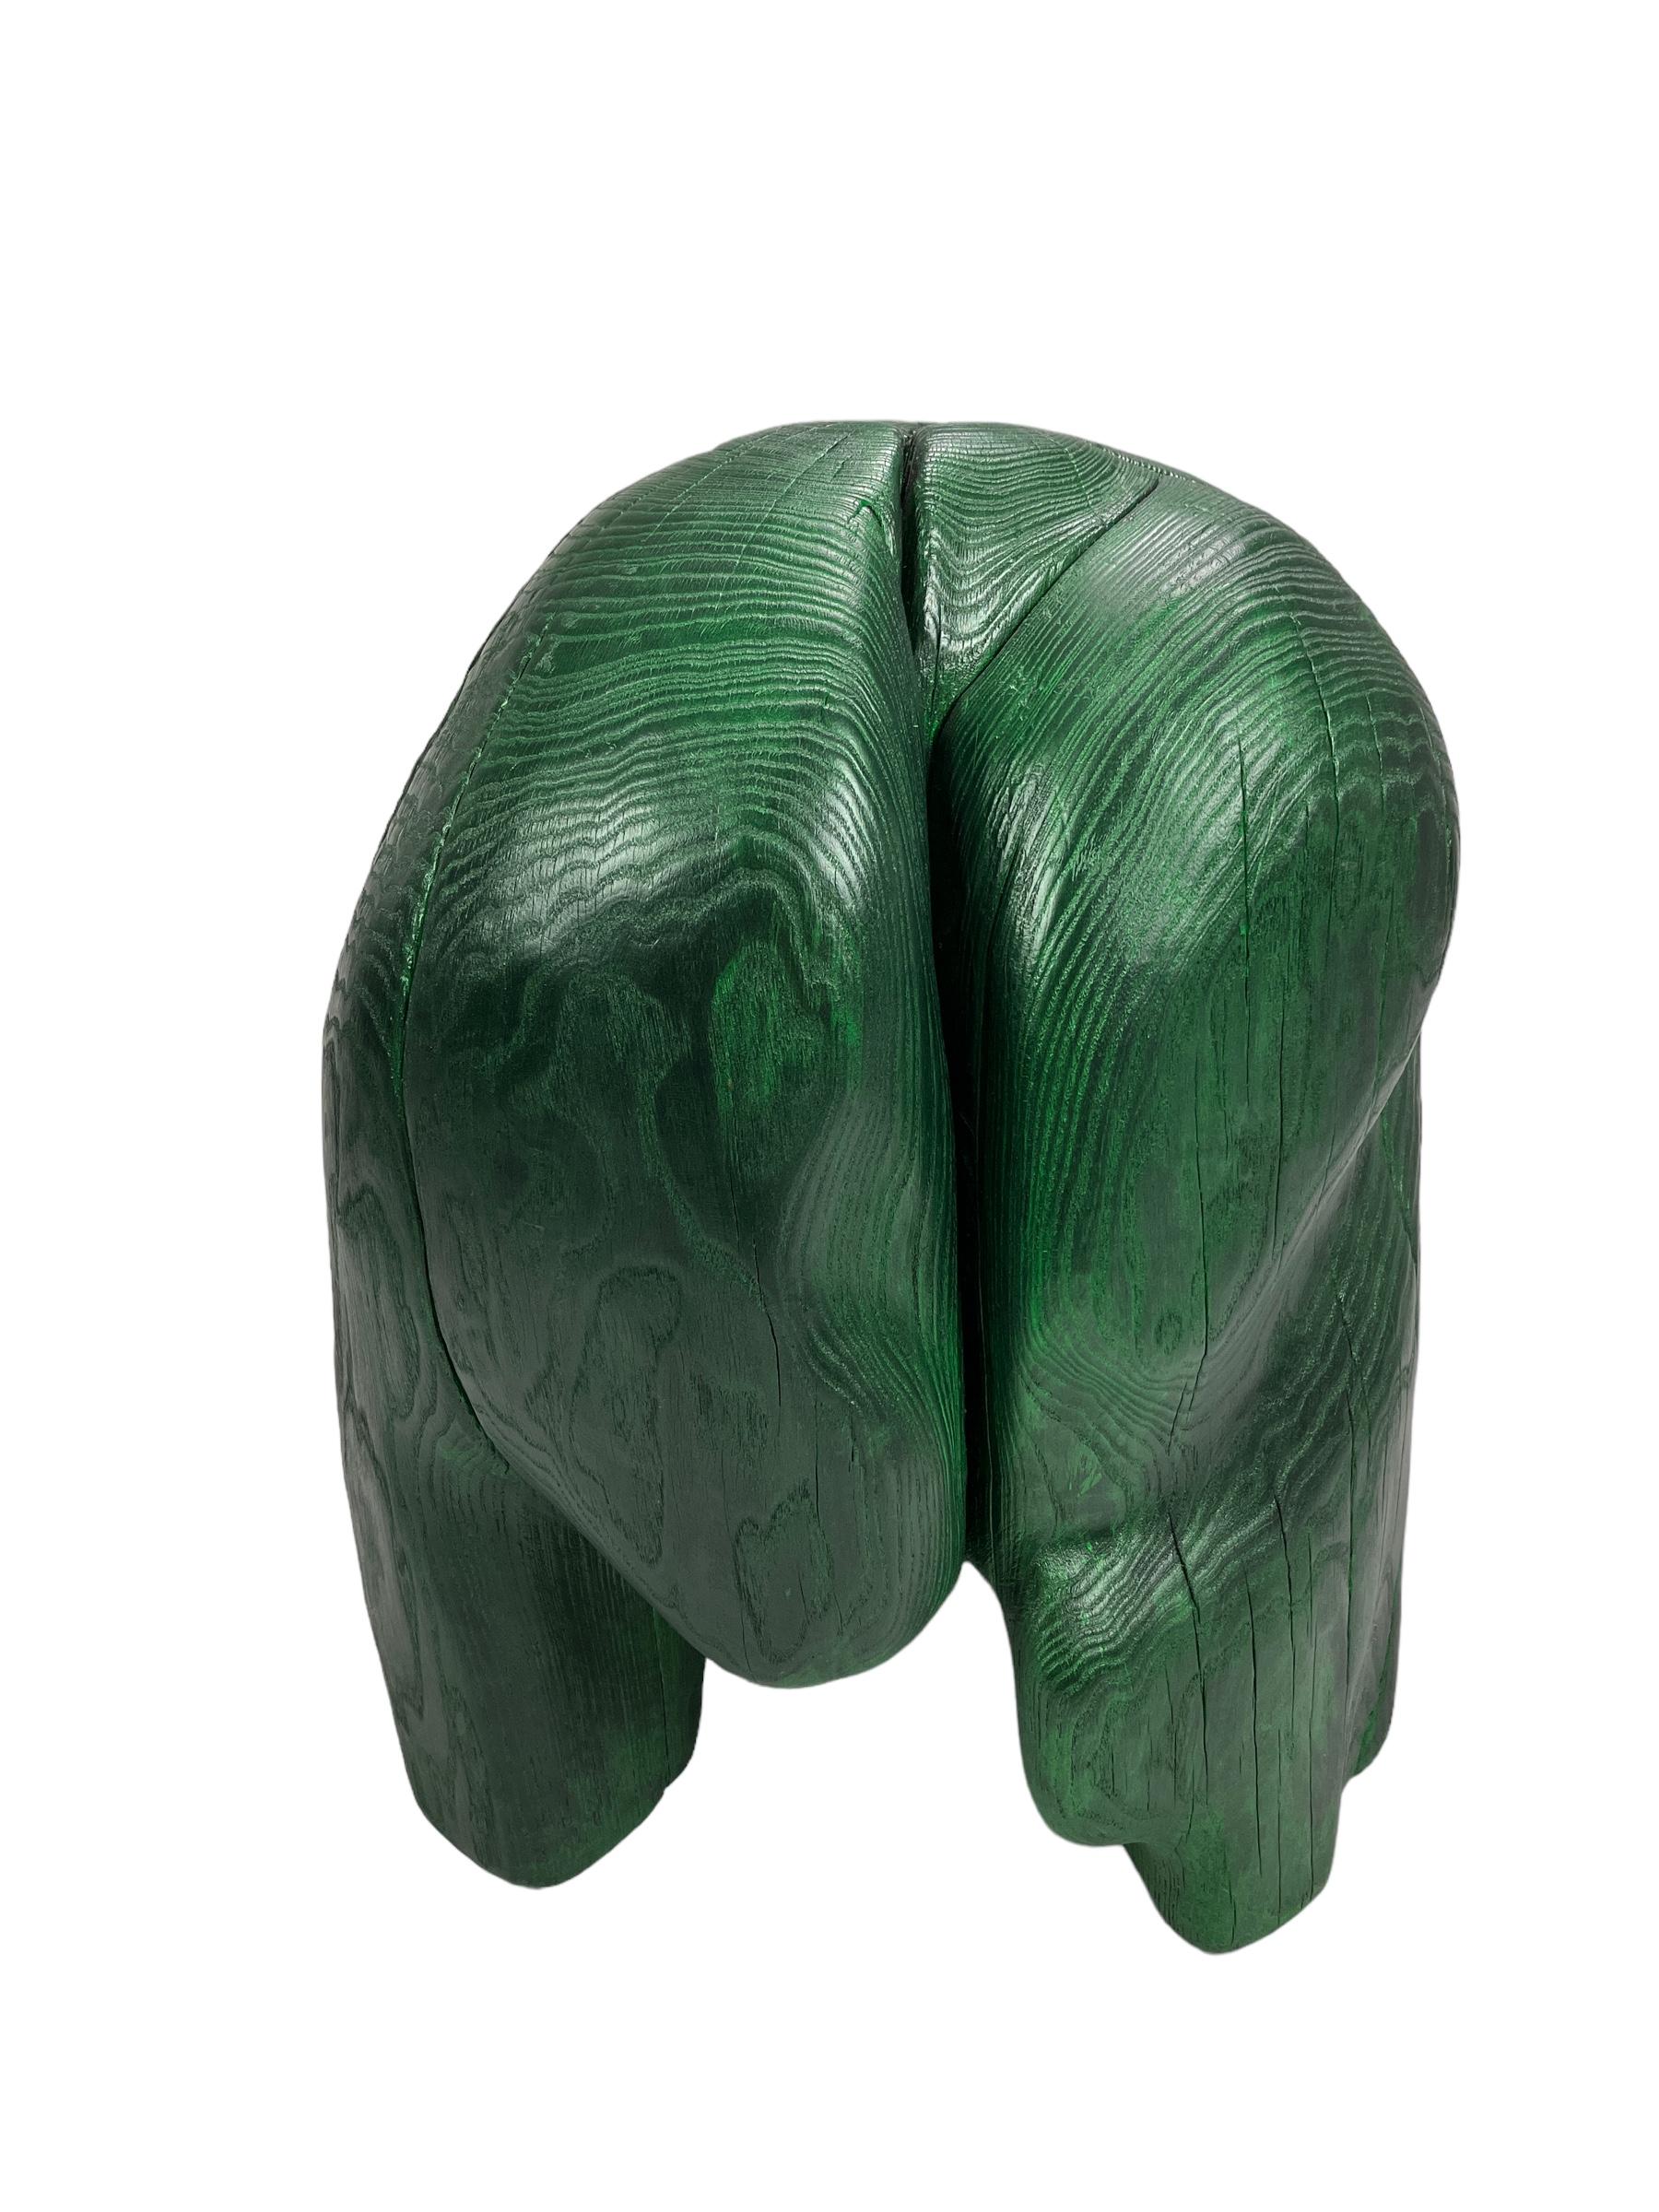 Carved wooden stool from locally sourced elm wood from the lanscape of Småland . Hand carved by master Swedish woodmaker ELAKFORM. 
Painted by hand with a durable acrylic-based colour and finished with an acrylic lacquer. The special green paint